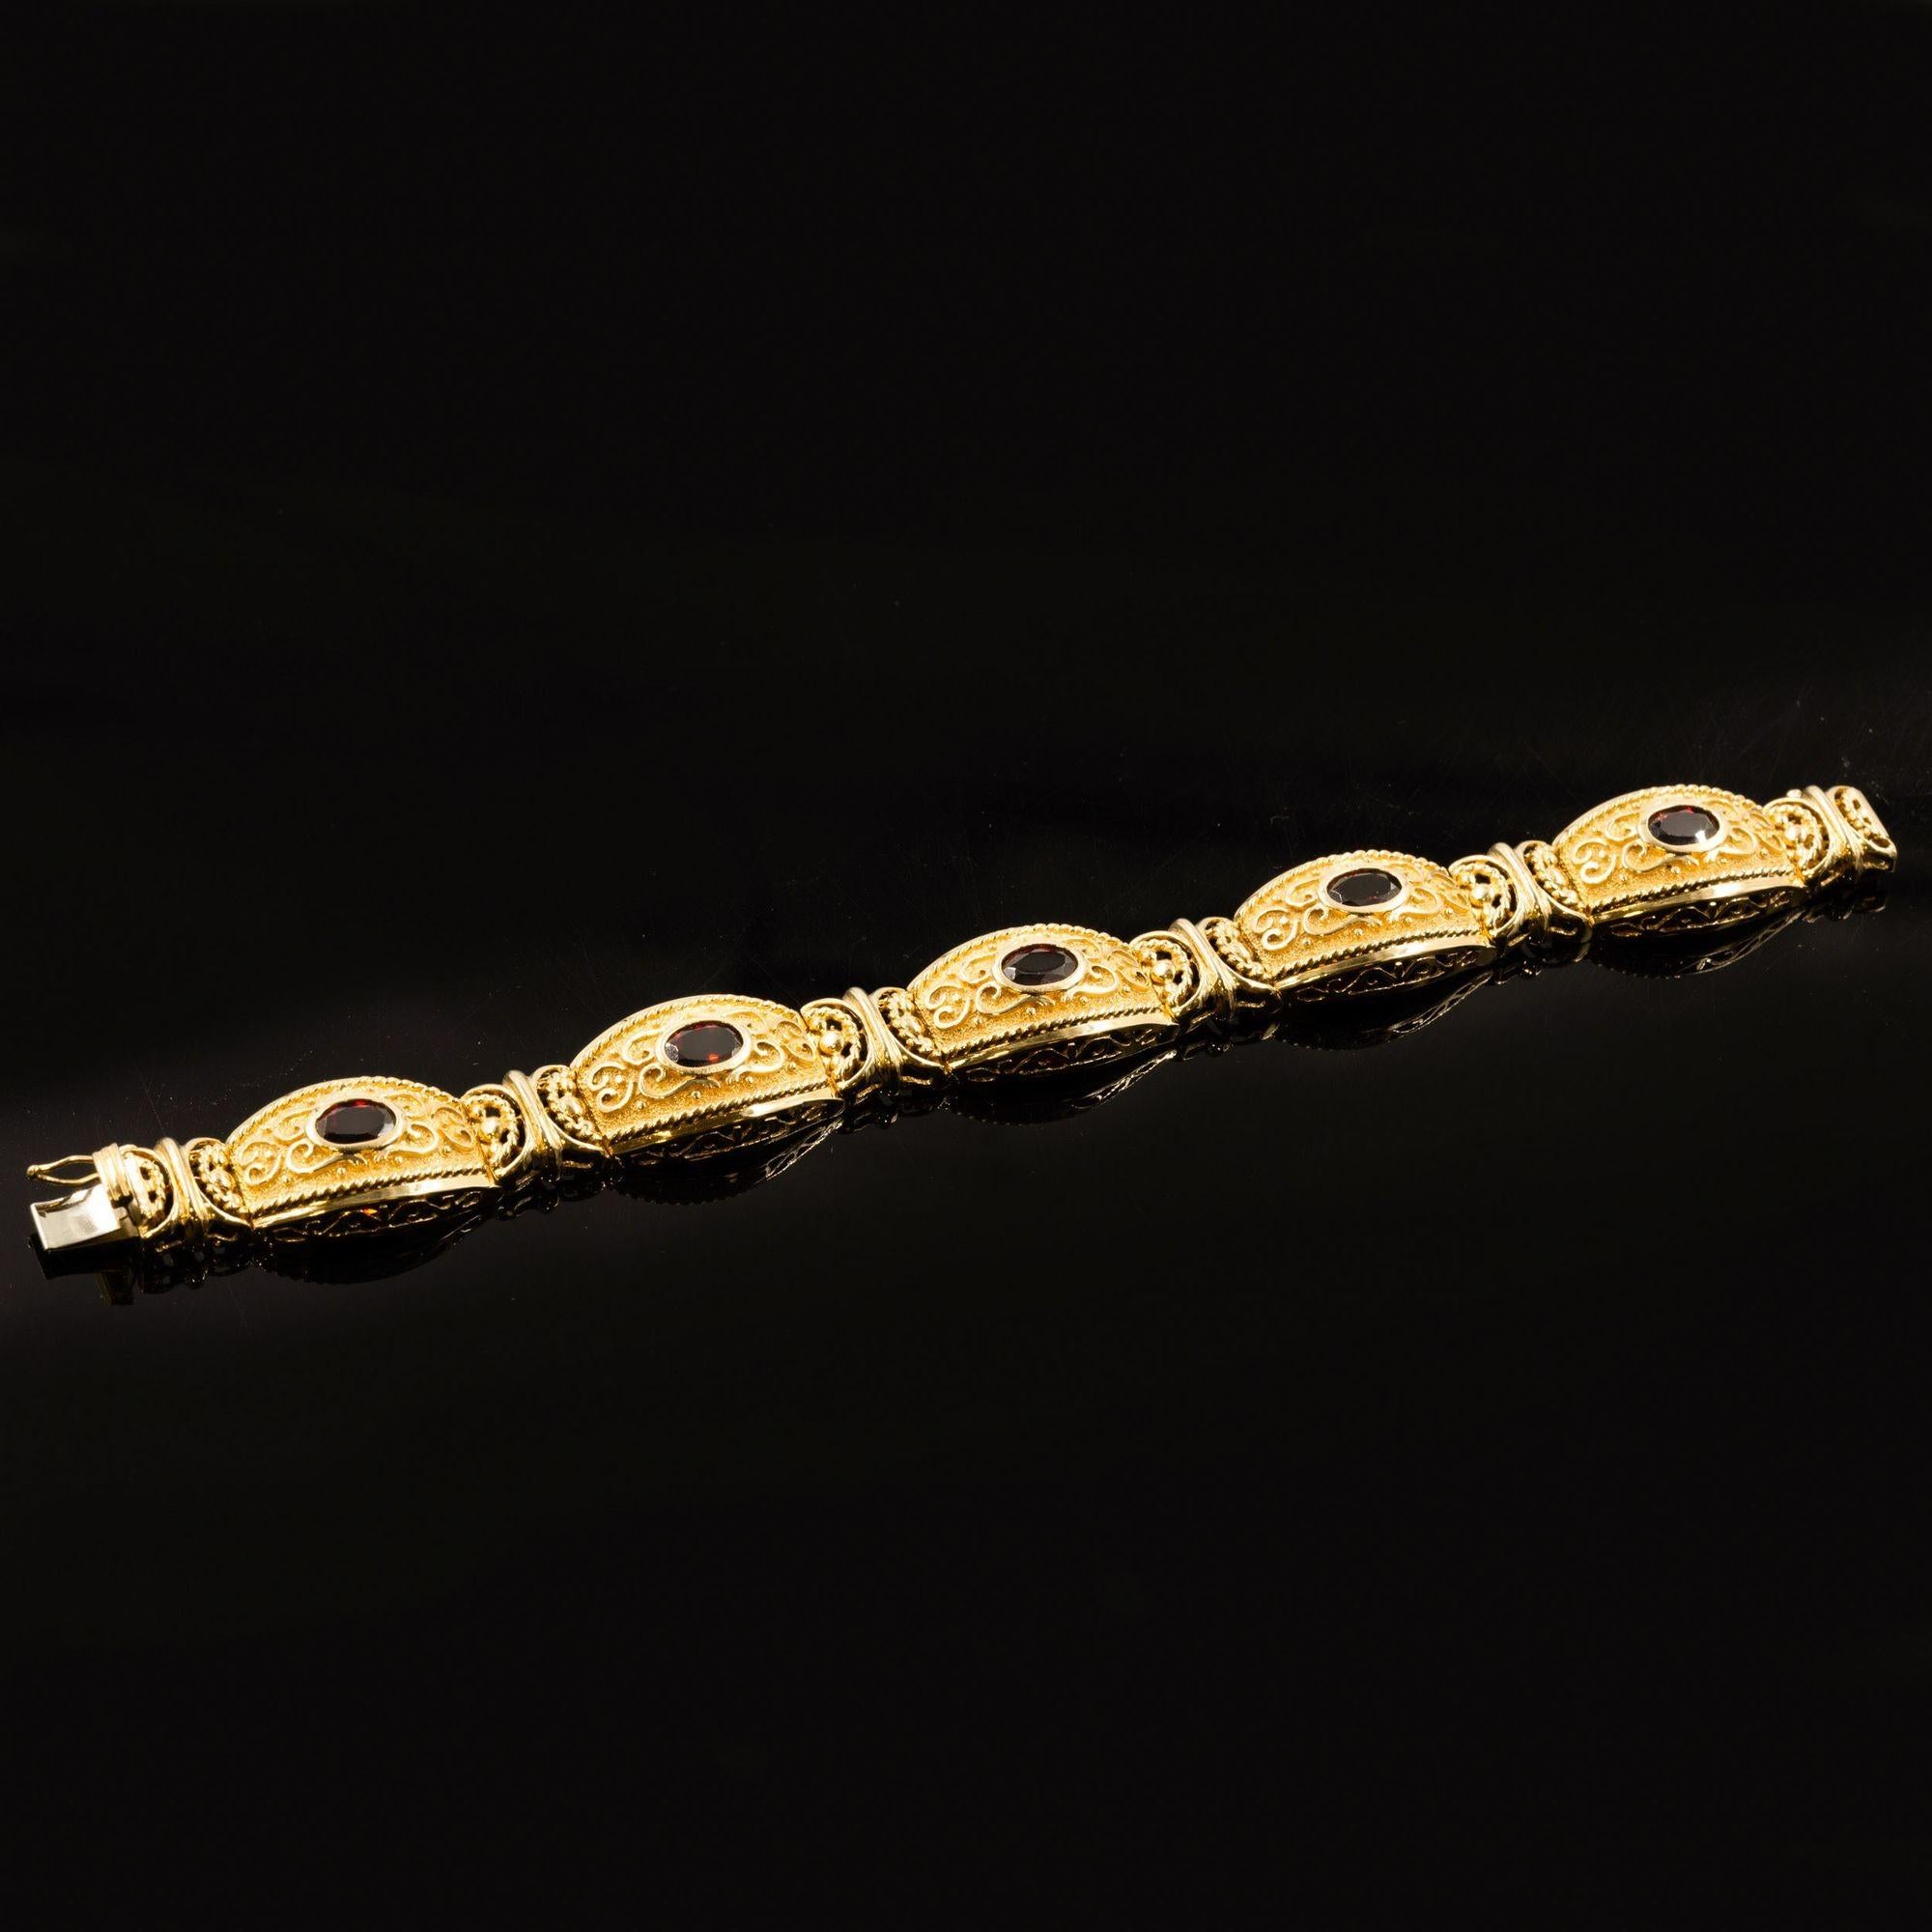 VINTAGE ETRUSCAN REVIVAL STYLE 14K GOLD AND GEMSTONE BRACELET
Item # 308QAJ11Z 

A very finely made bracelet in the Etruscan Revival taste, it is executed in solid 14k gold with five bezel-set garnets surrounded by bas-relief scrolling vines over a